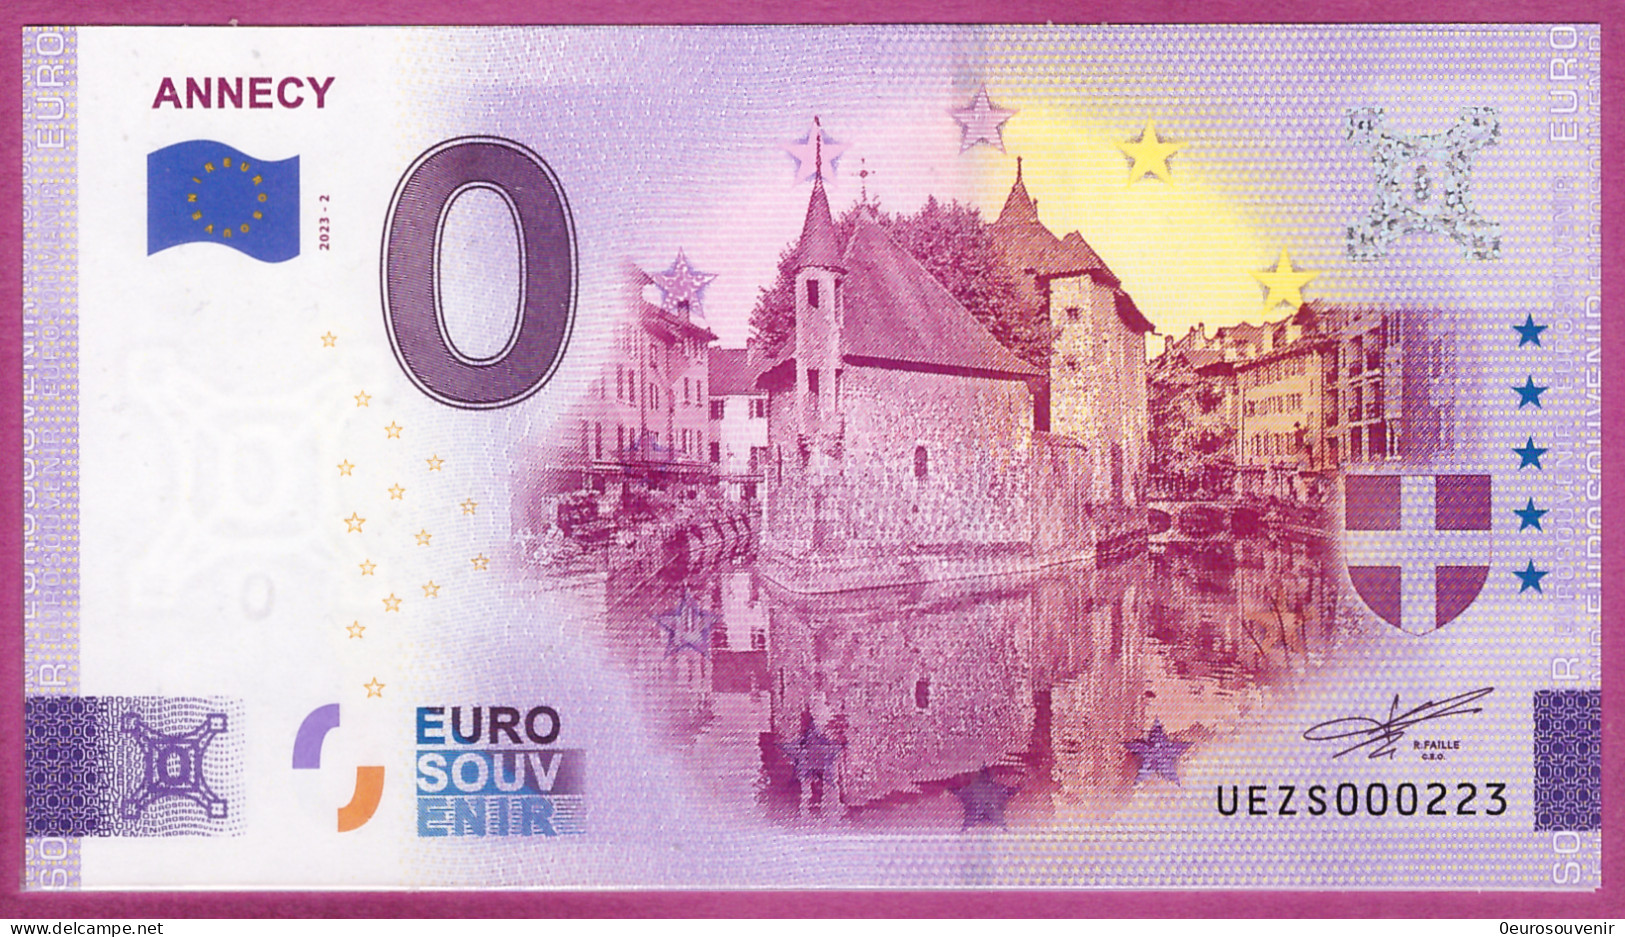 0-Euro UEZS 2023-2 ANNECY - Private Proofs / Unofficial